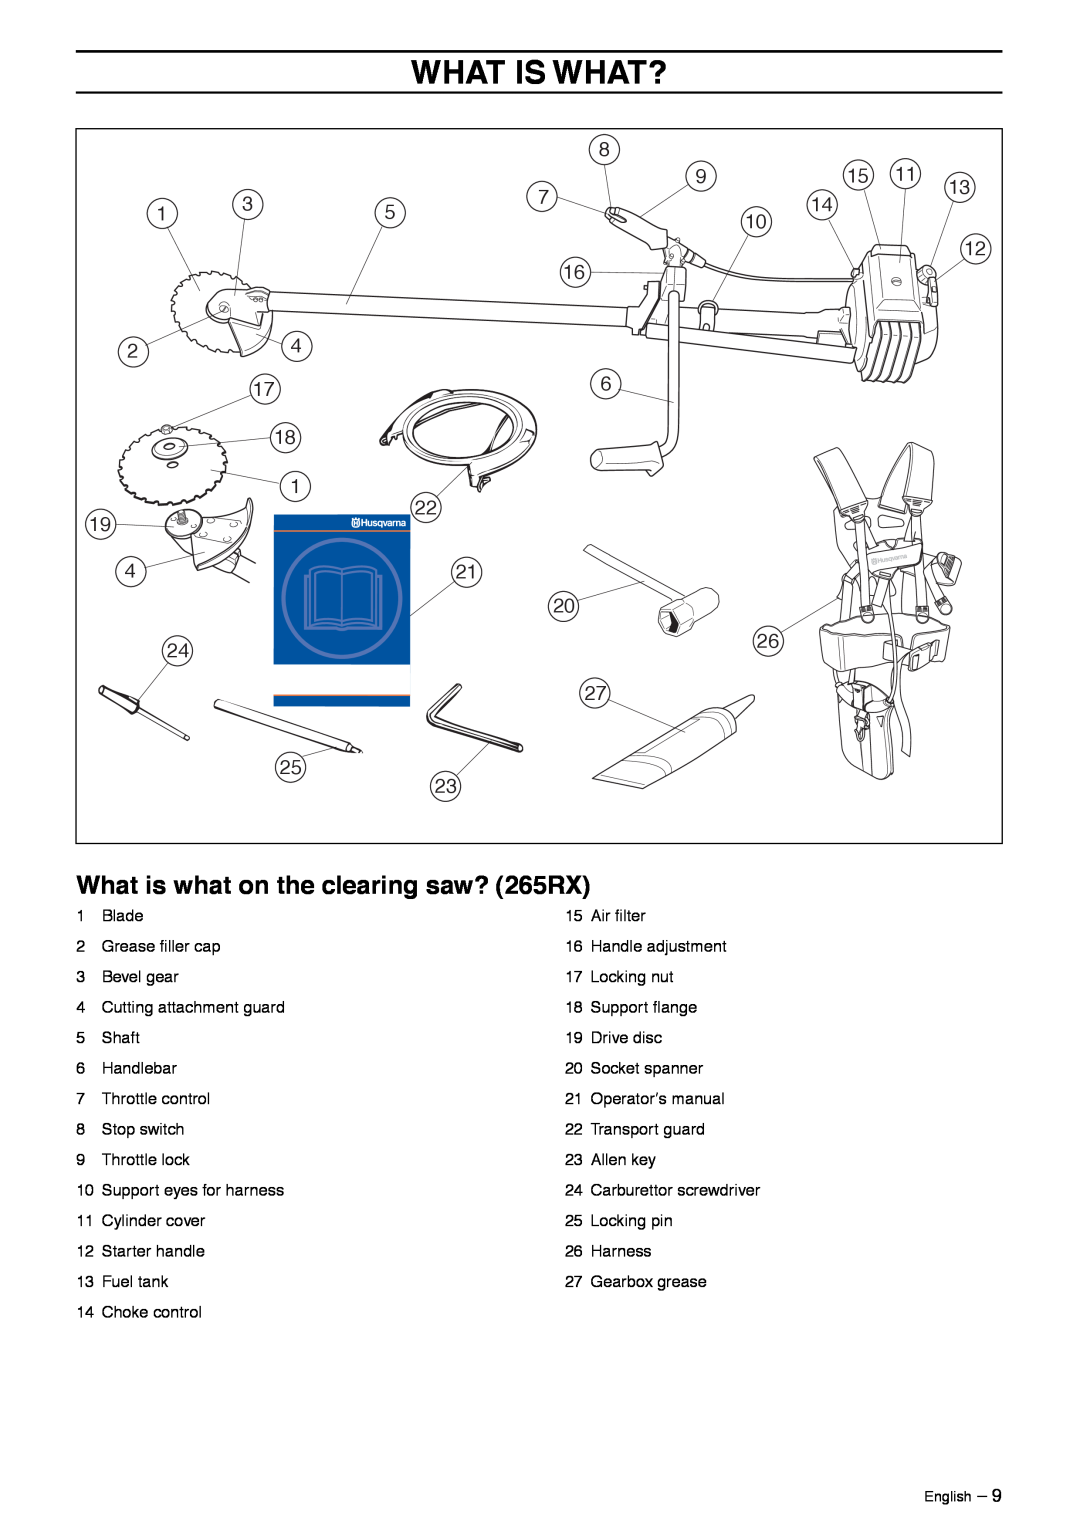 Husqvarna 250R, 240R, 240F, 252RX manual What is what on the clearing saw? 265RX, What Is What? 